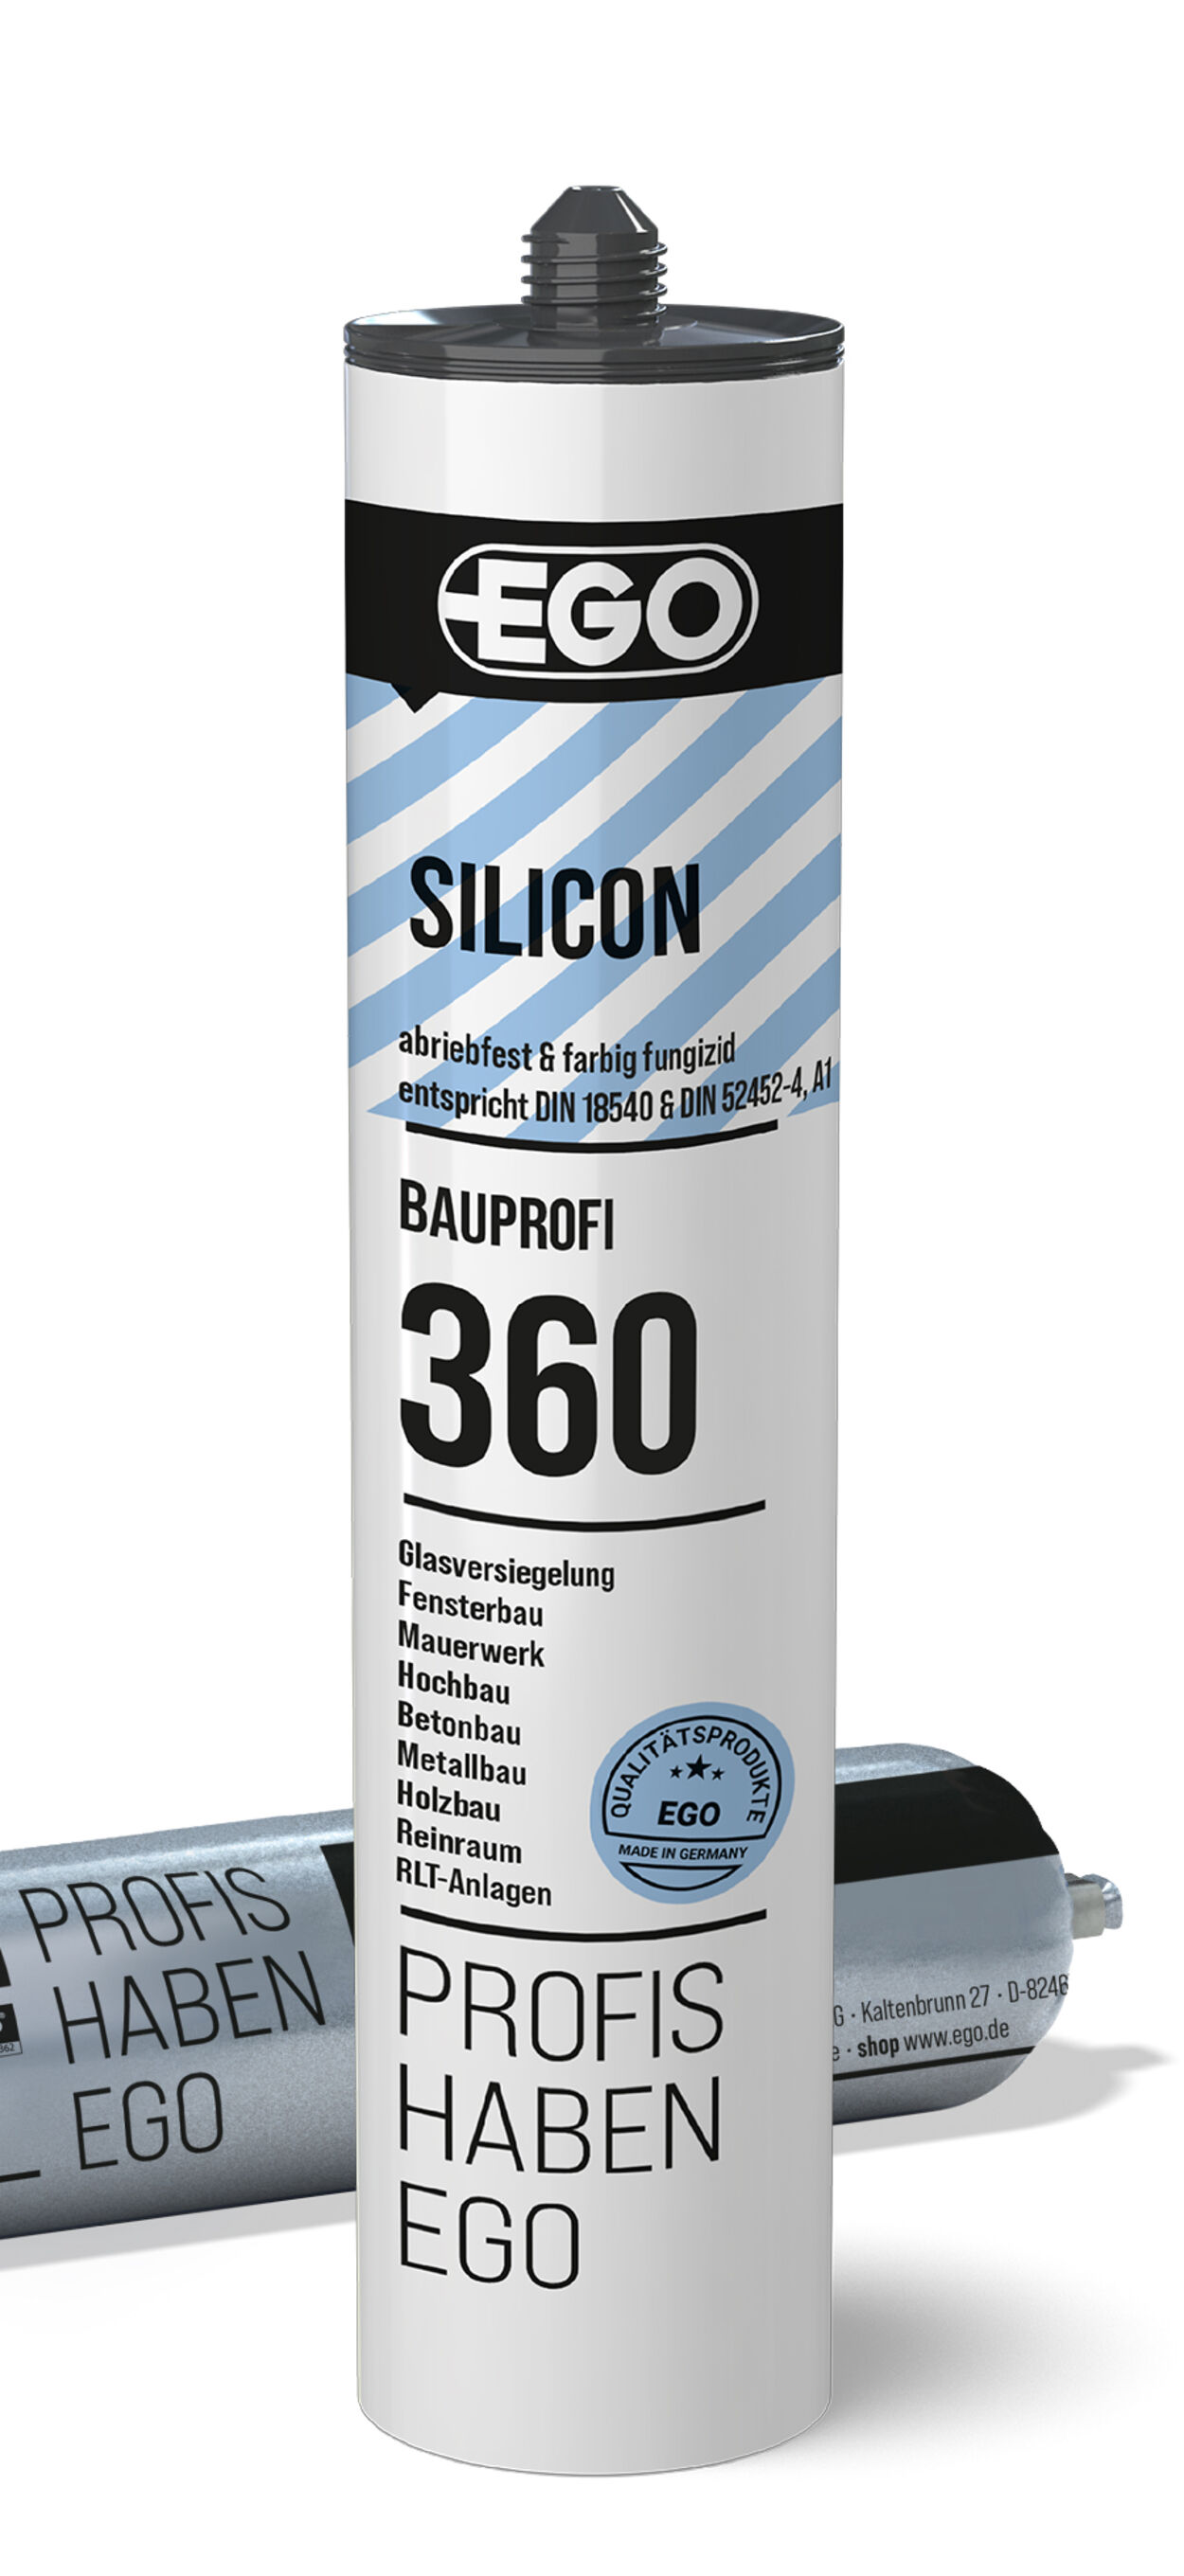 Silicone sealant for window sealing